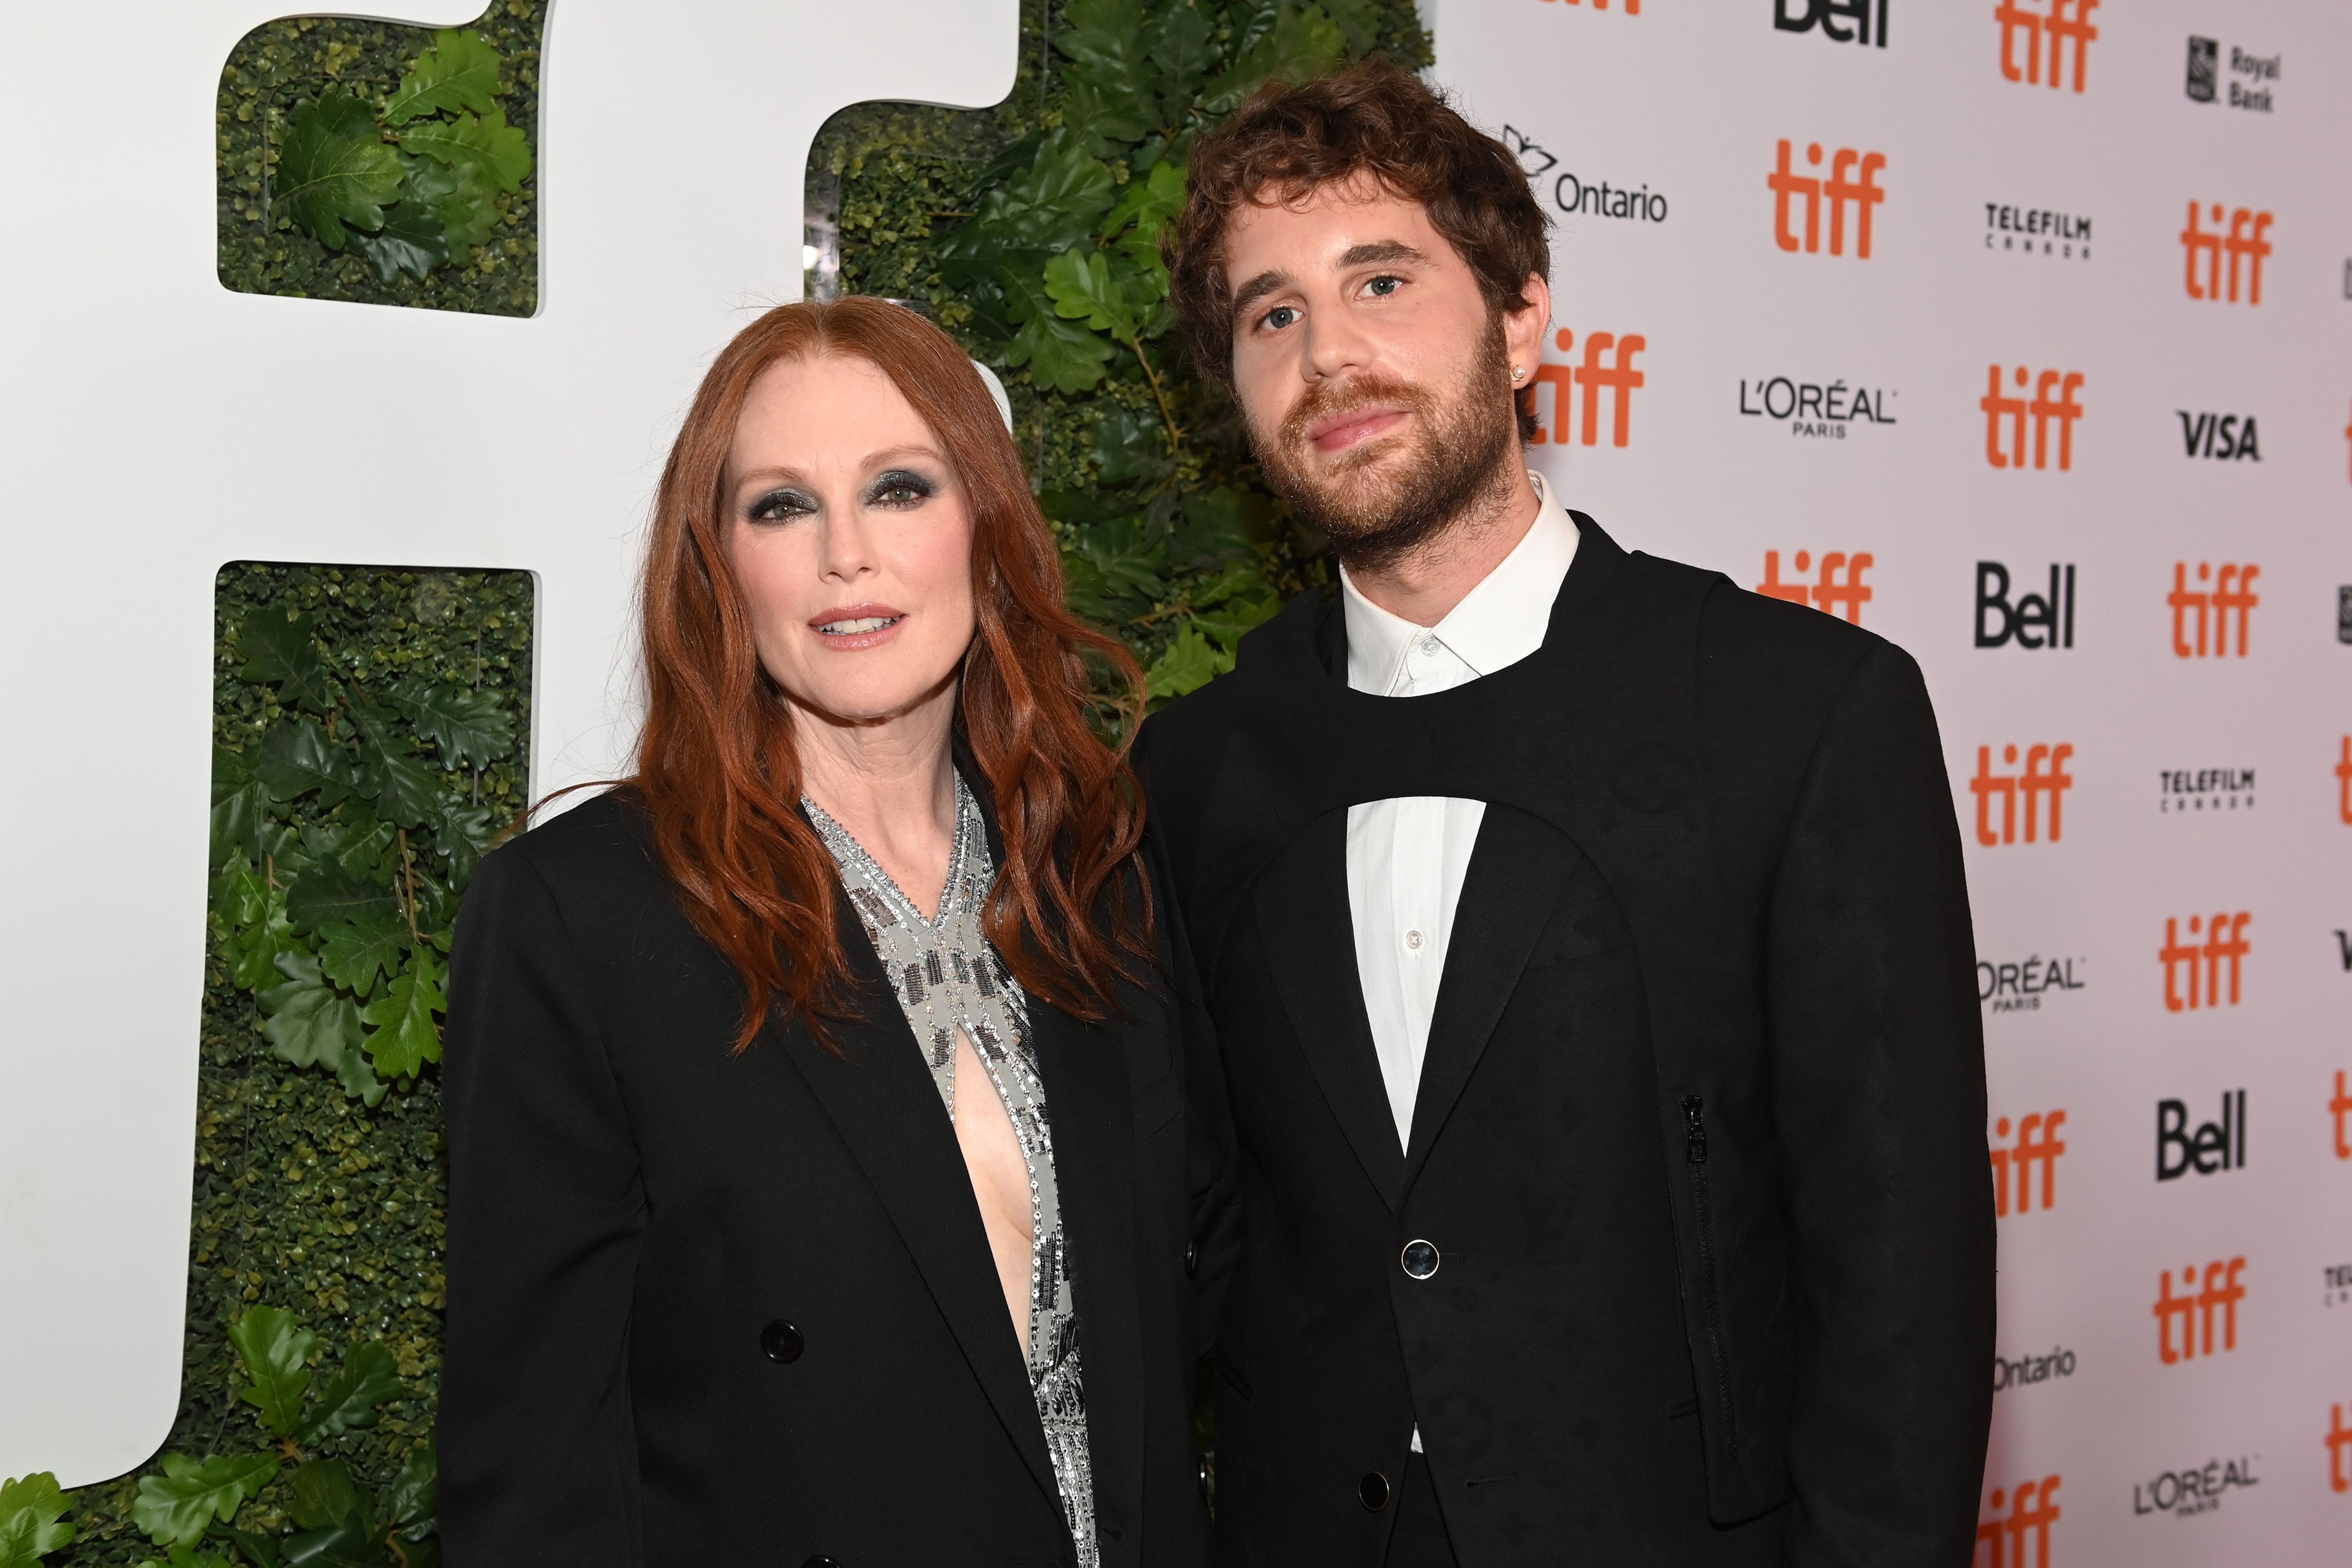 Julianne Moore, in a black jacket and grey dress, and Ben Platt in a black and white suit, attend the premiere of 'Dear Evan Hansen' at the Toronto International Film Festival in 2021.